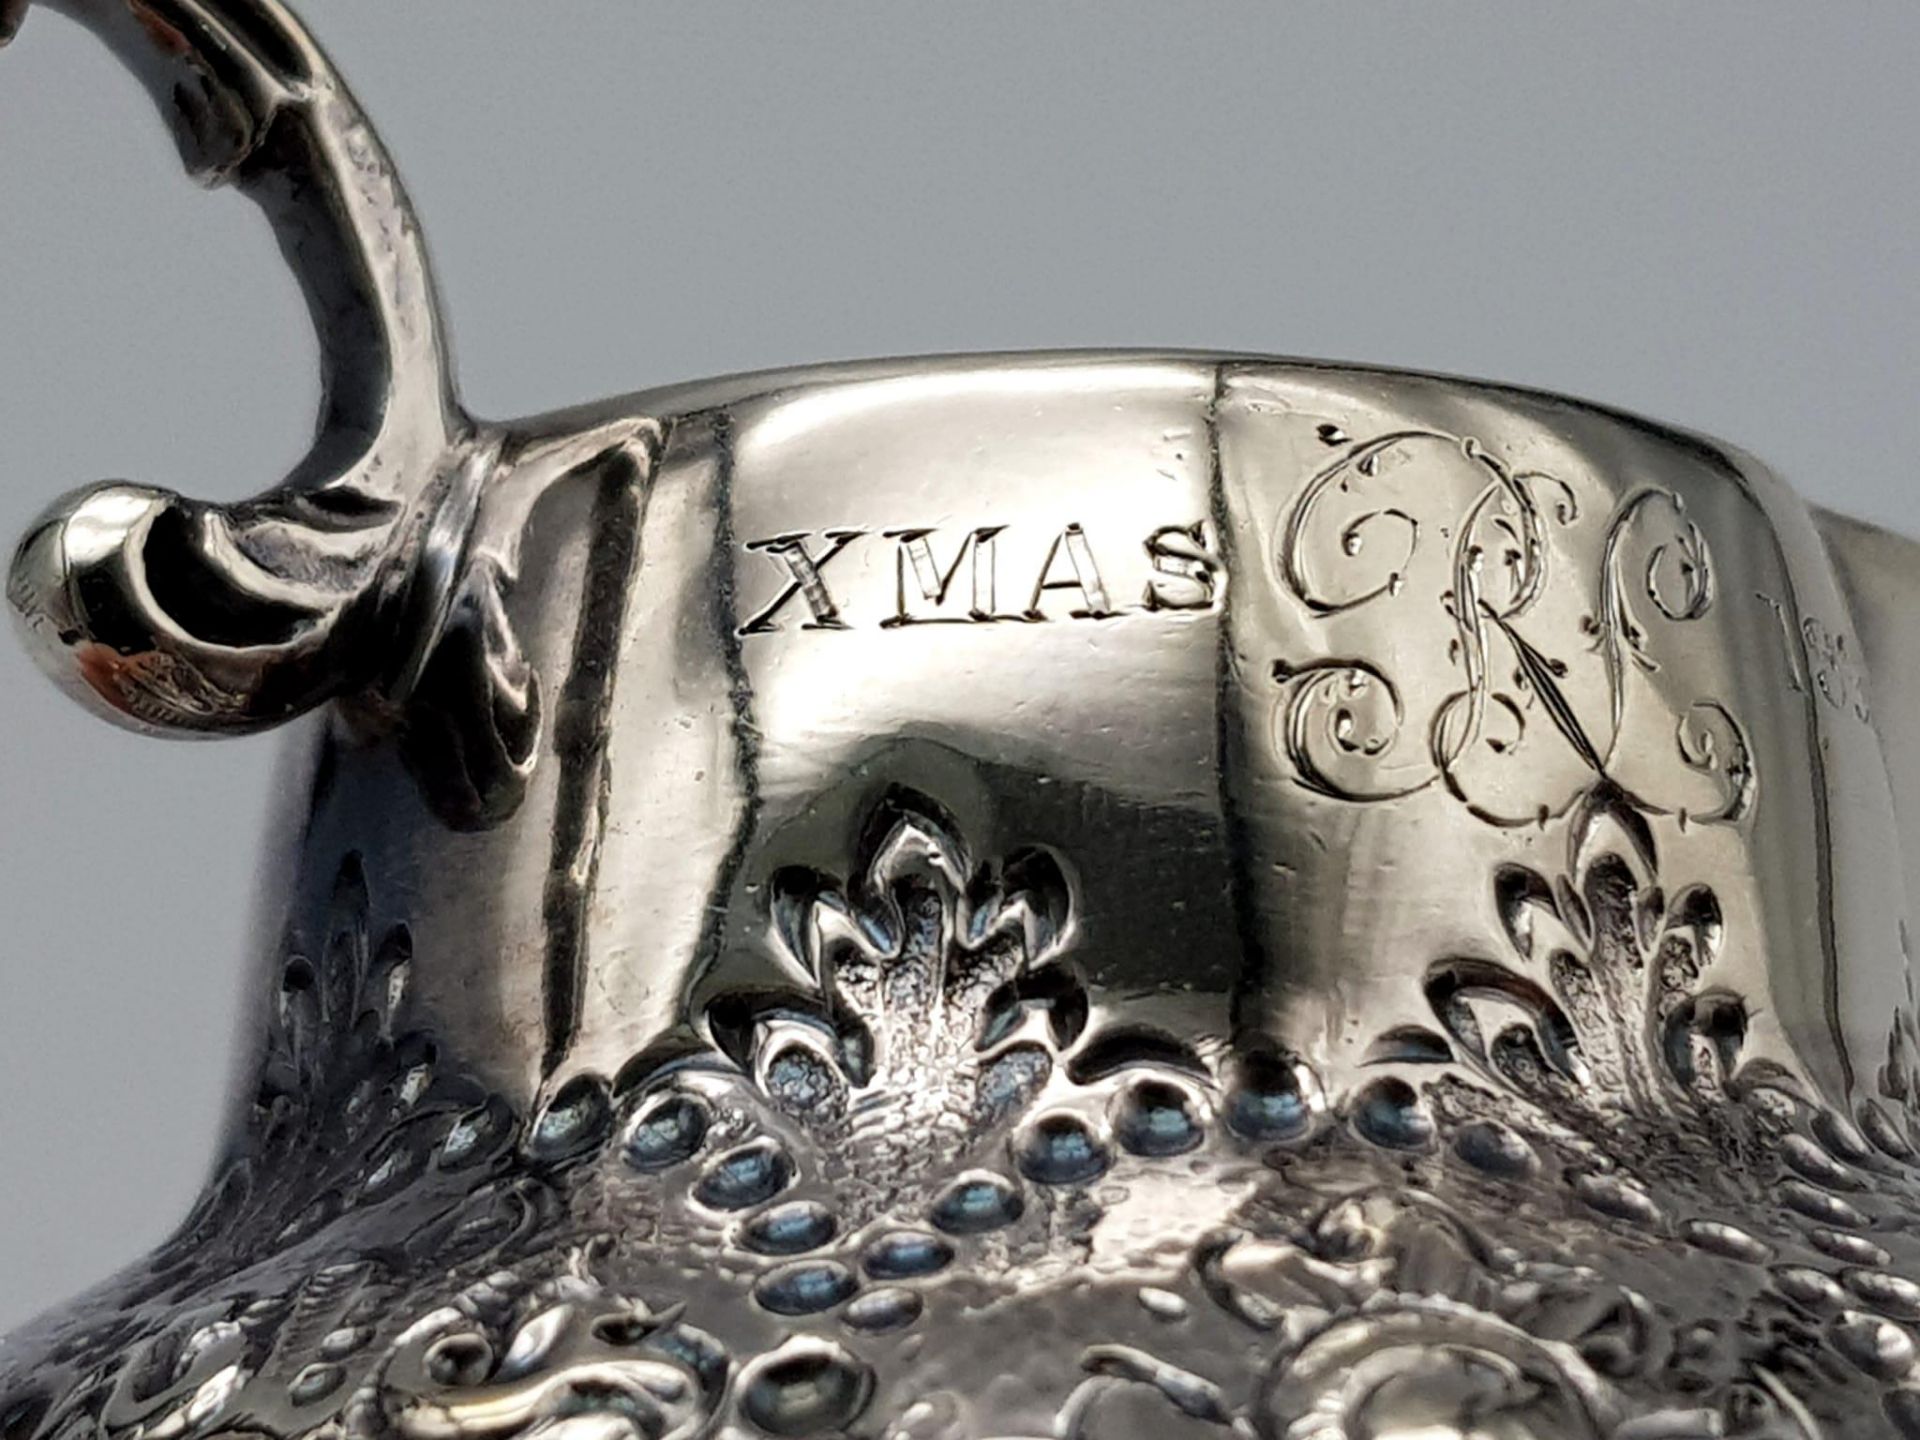 A SMALL SOLID SILVER JUG WITH THE INSCRIPTION "XMAS 1899" ALTHOUGH THE HALLMARK IS DATED 1891 WITH - Image 7 of 9